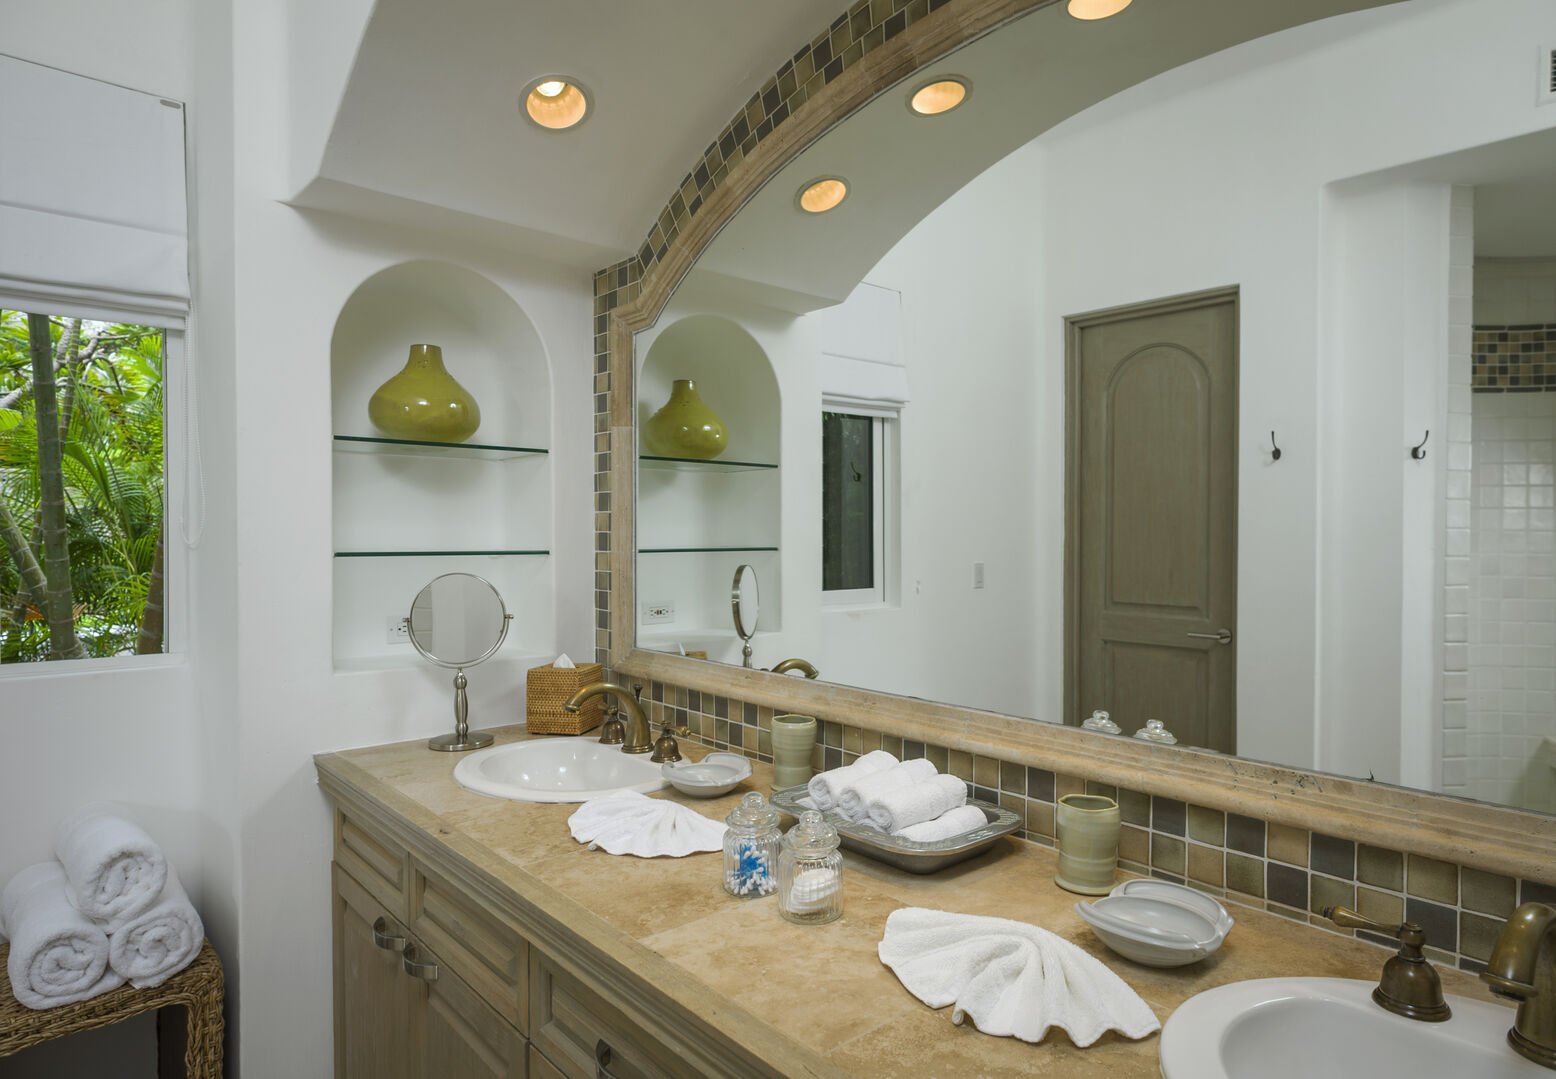 A palatial vanity unit for two and white towels